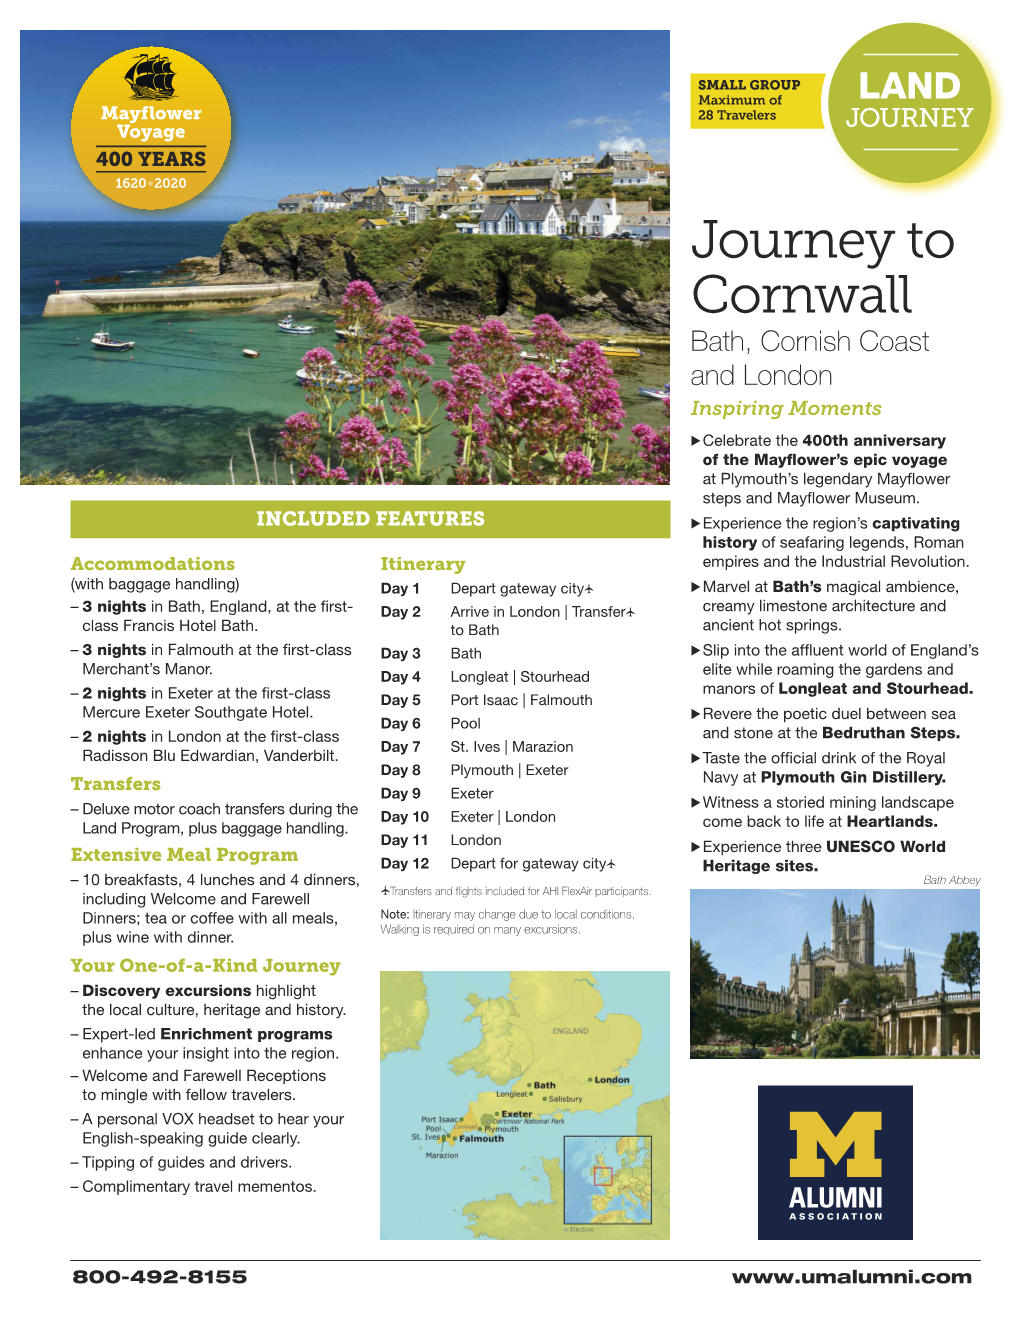 Journey to Cornwall